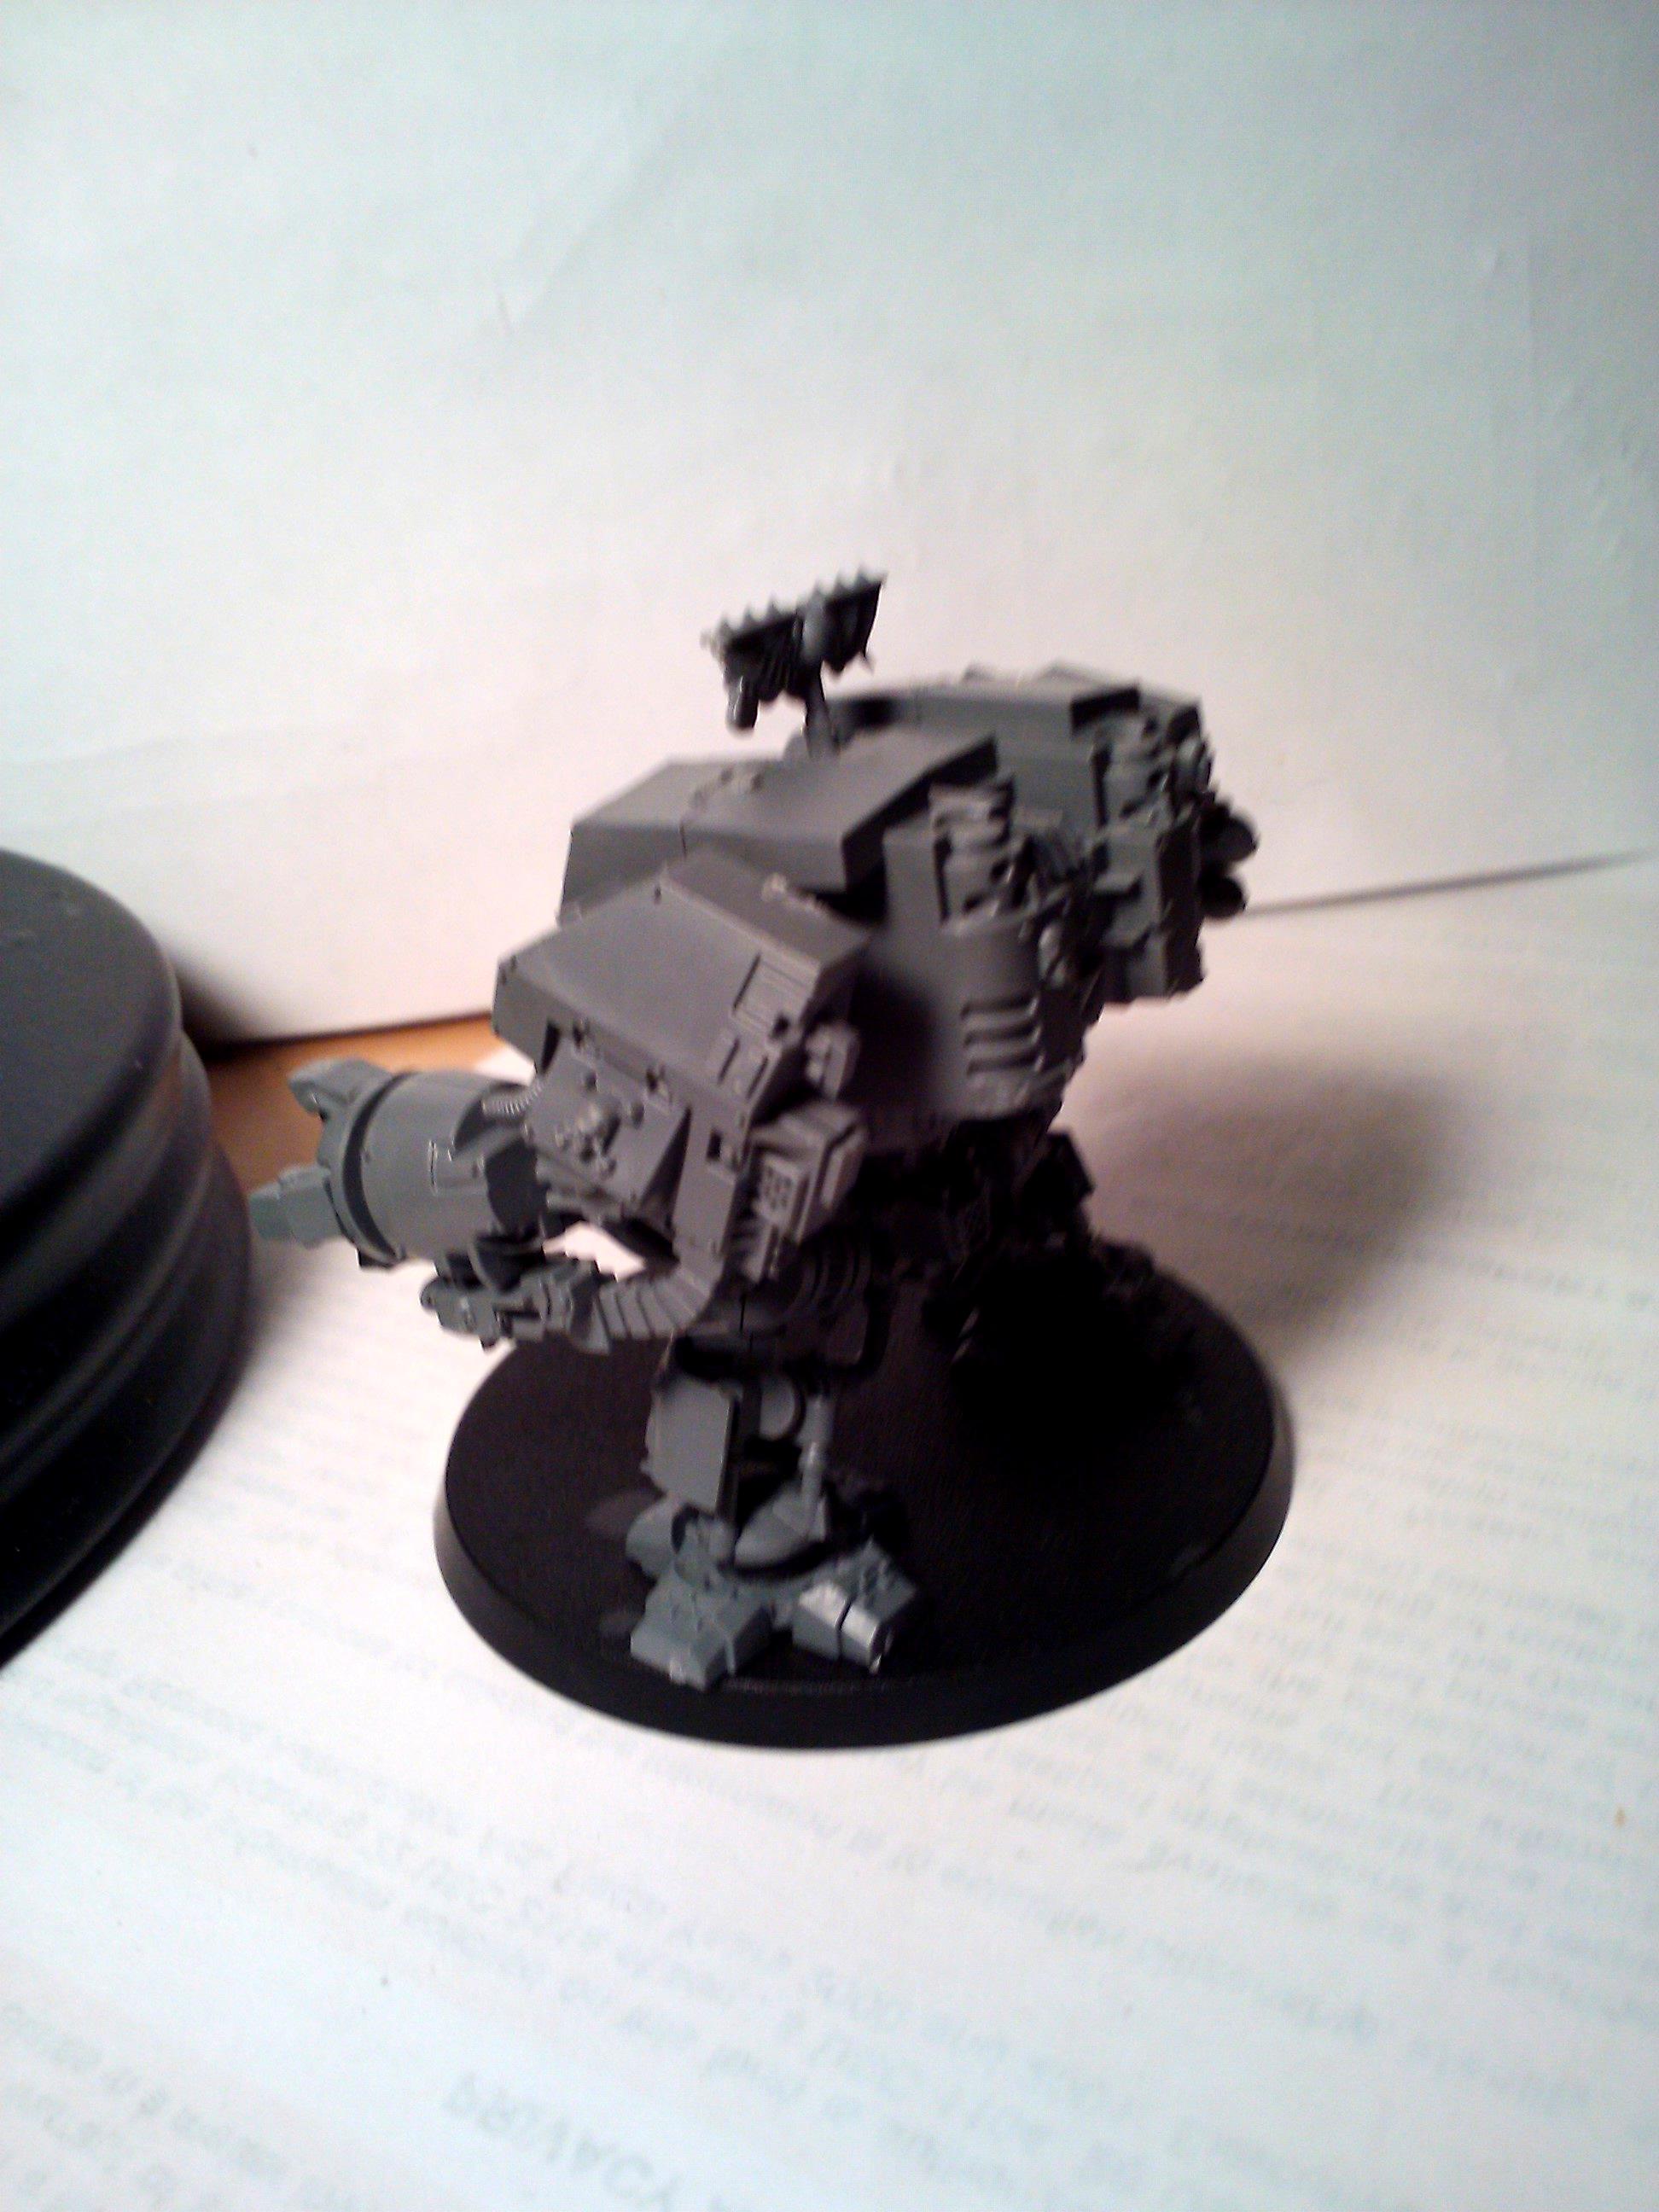 Conversion, Dreadnought, Hobby, Kill Team, Scenario, Space Marines, Space Wolves, Sw